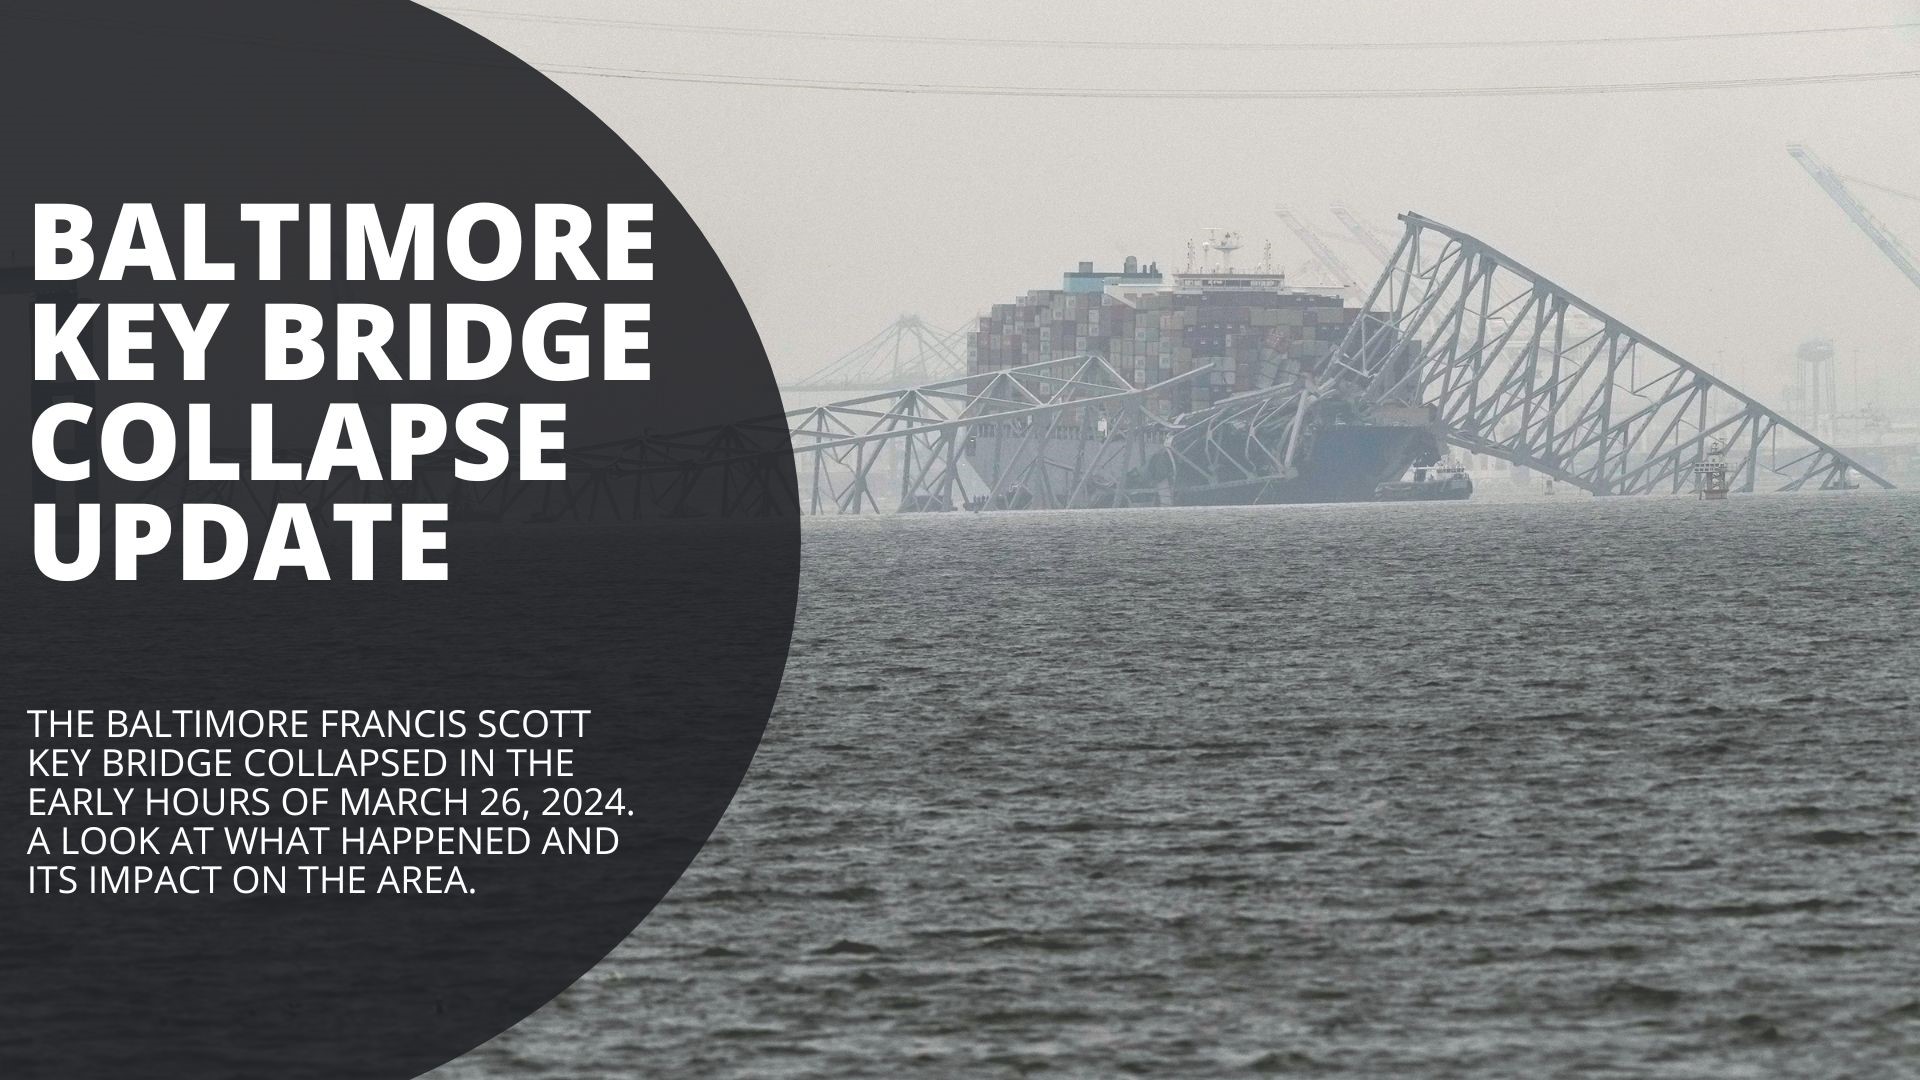 The Baltimore Francis Scott Key Bridge collapsed in the early hours of March 26, 2024. A look at what happened and its impact on the area.